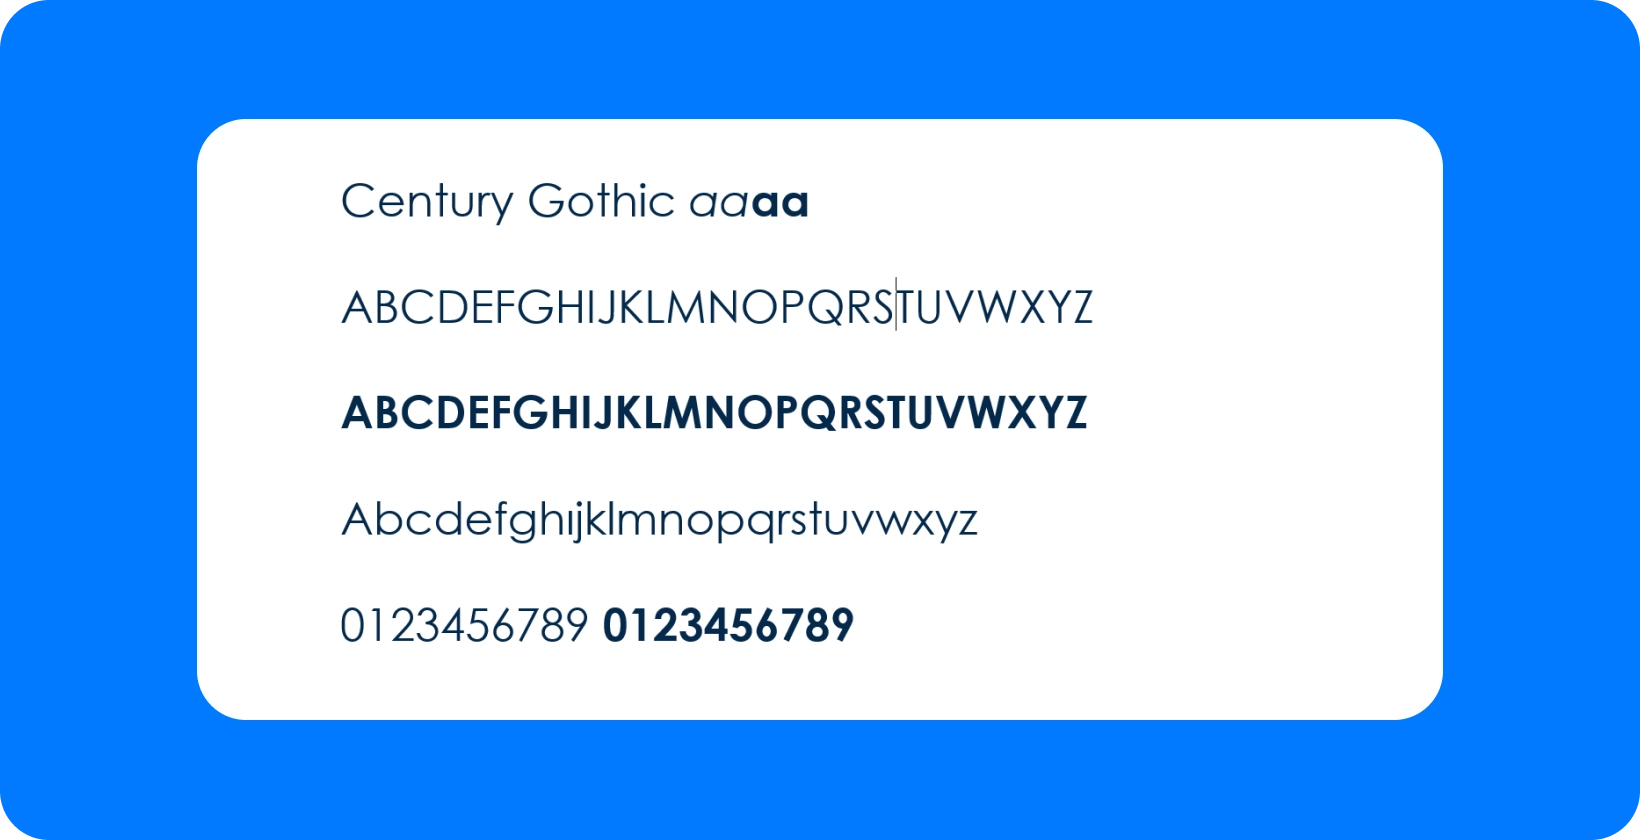 Century Gothic font offers a modern, geometric look for subtitles, perfect for readability on YouTube and Premiere Pro.